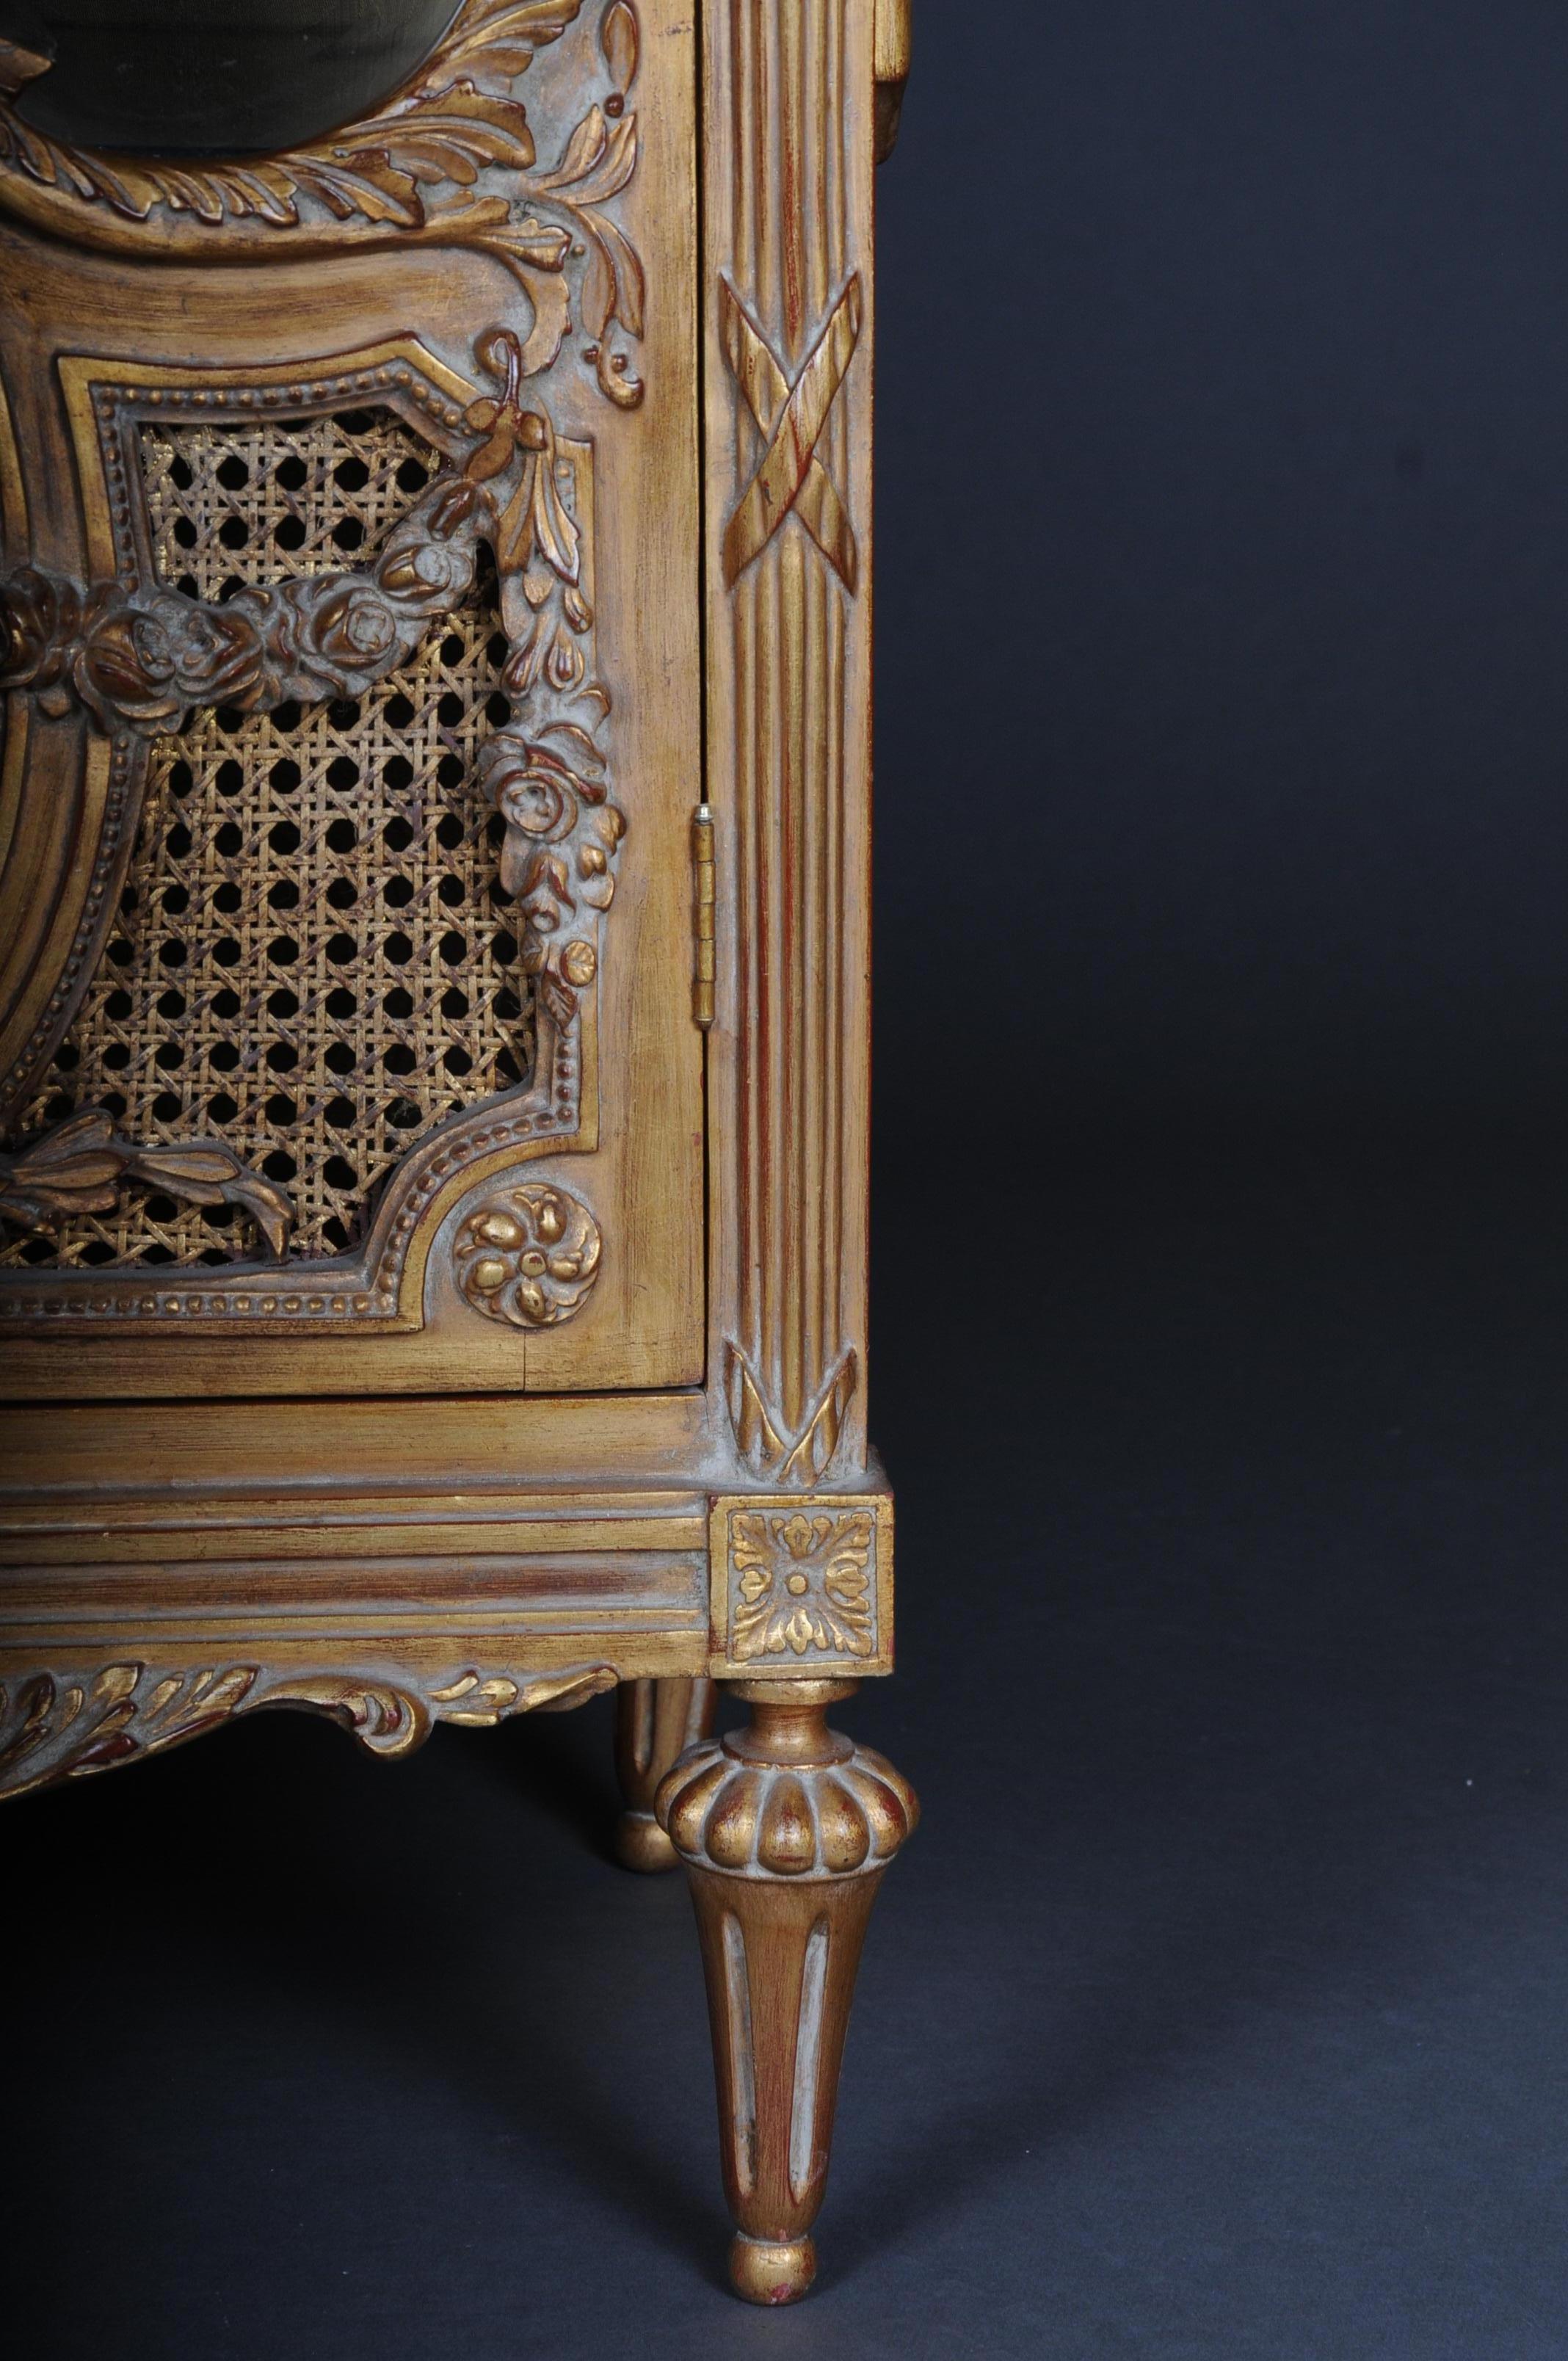 Solid beech, gilded. Rectangular, three-sided, faceted beveled, one-door body on conical legs. The door is partially provided with wickerwork. The front, corners and sides are decorated with carved, classic elements such as garlands and bows.